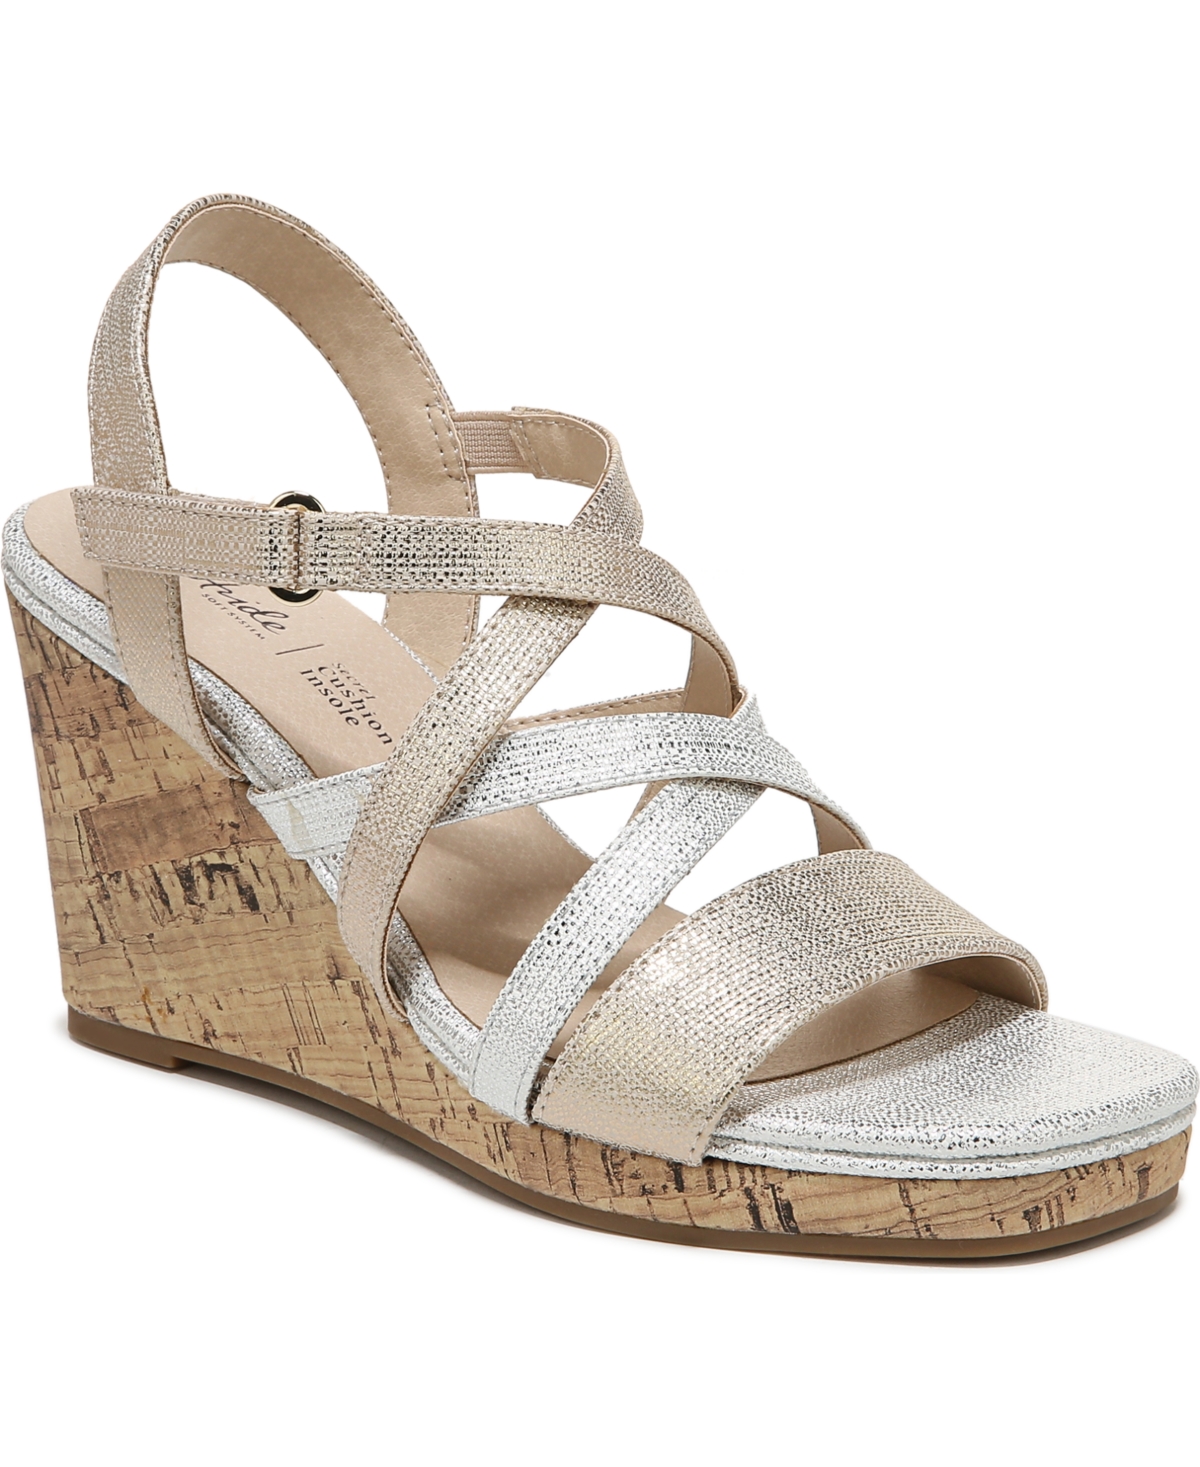 Indigo Strappy Sandals - Gold/Silver Faux Leather